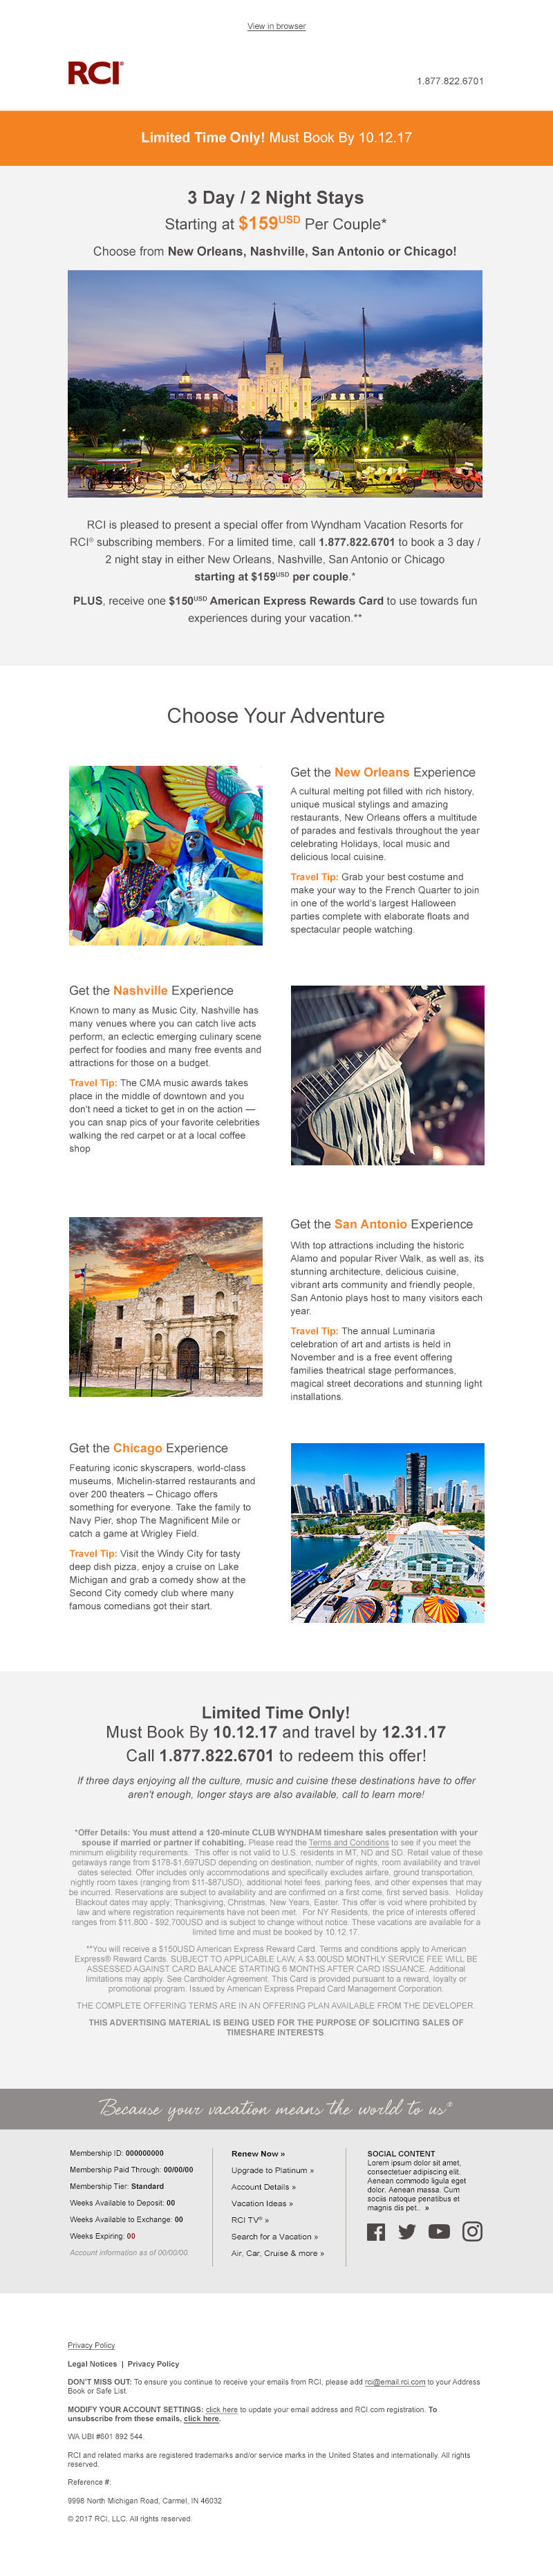 Travel Email branding  offers